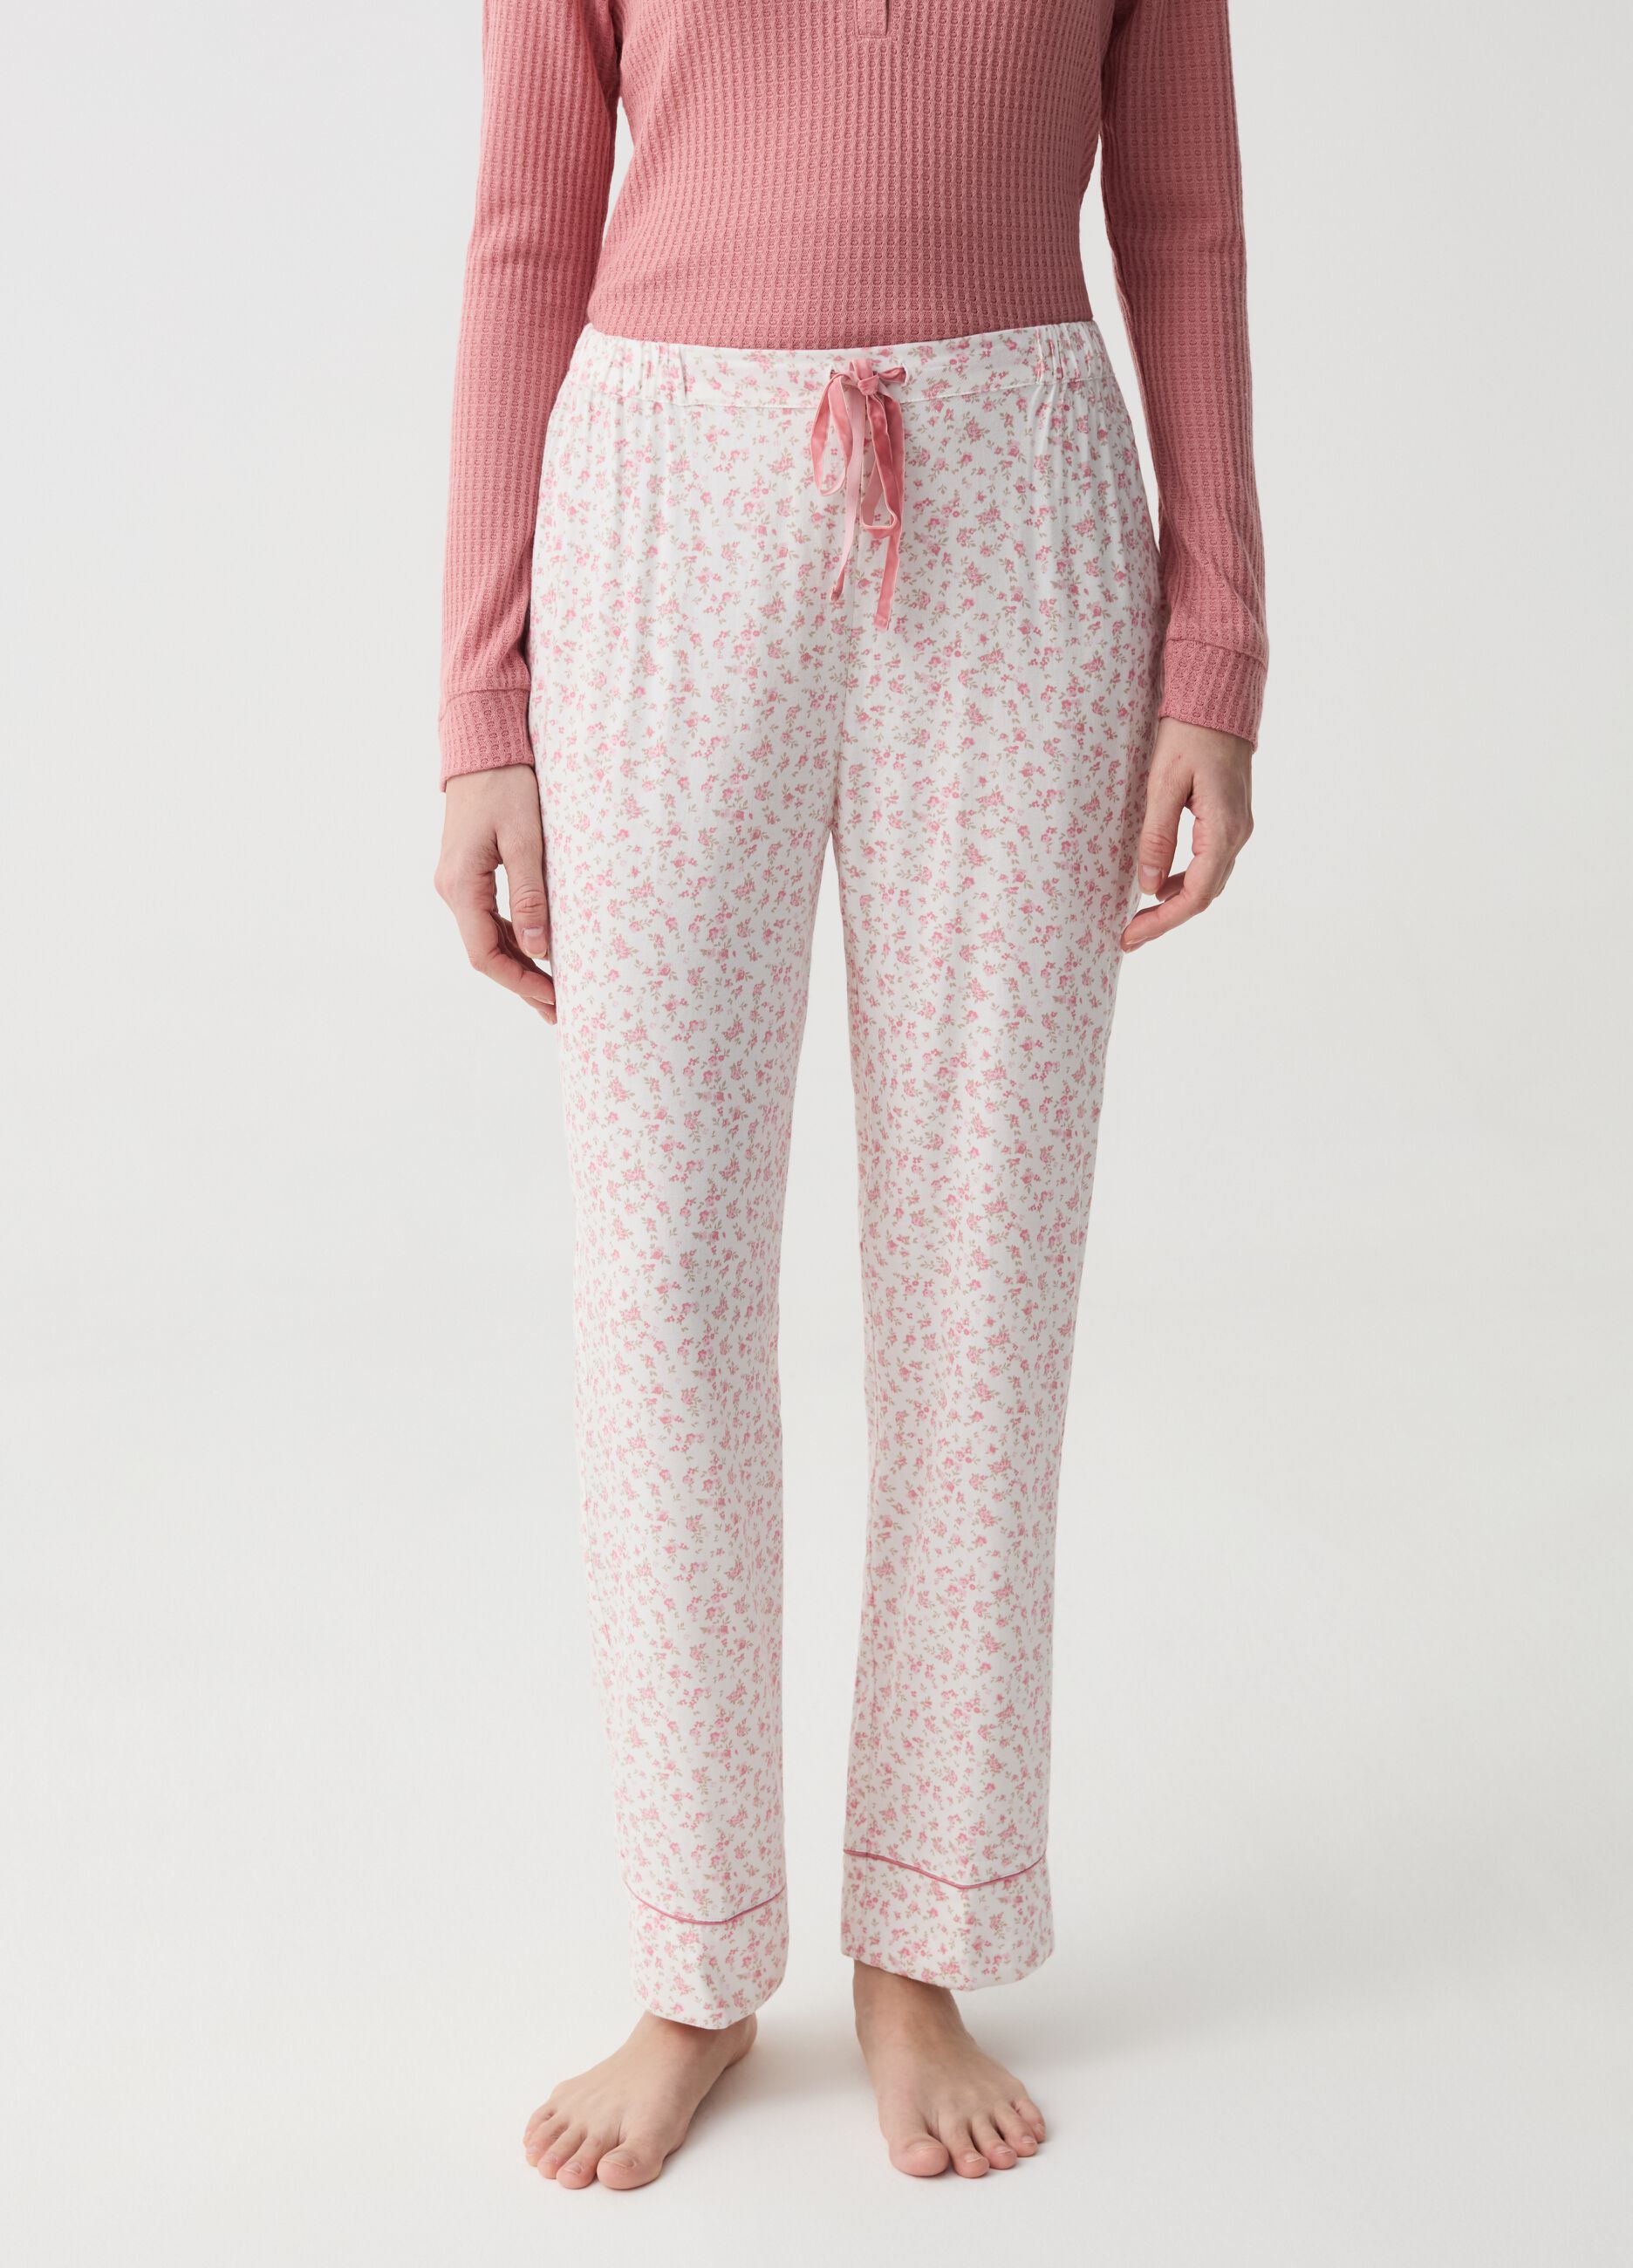 Pyjama trousers in floral flannel